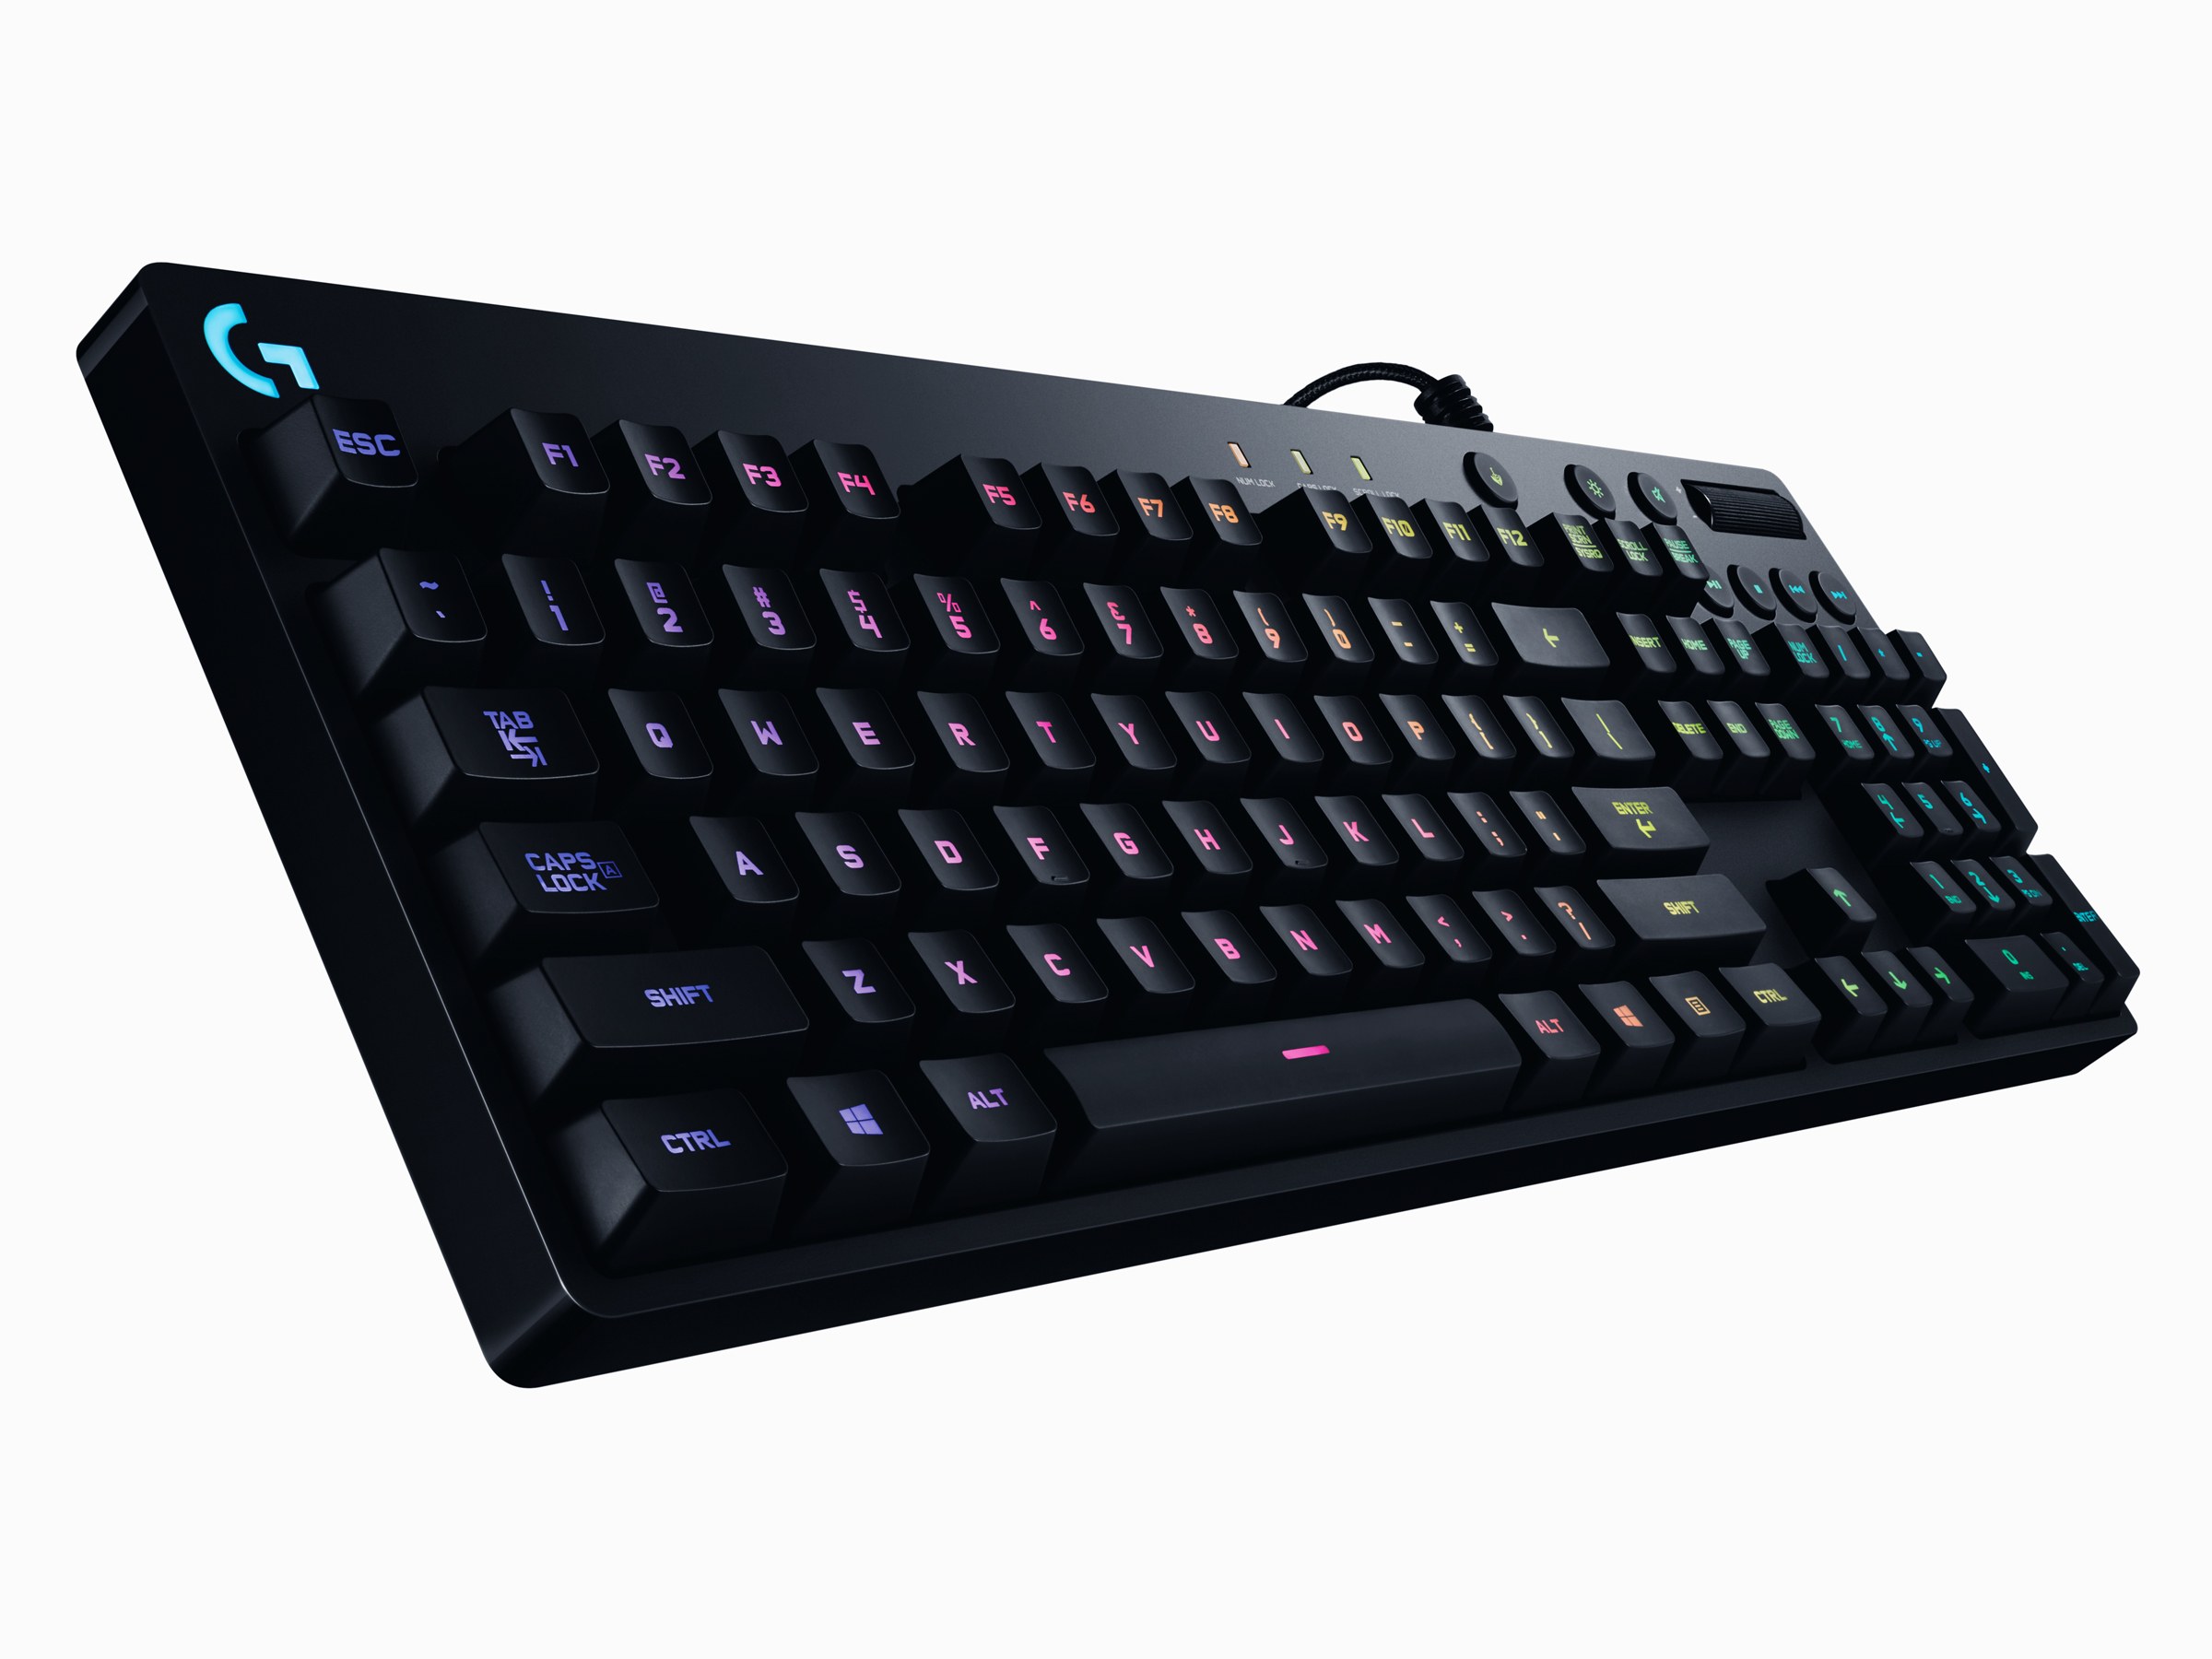 It’s a Clackdown Top Mechanical Keyboards, Rated Techio